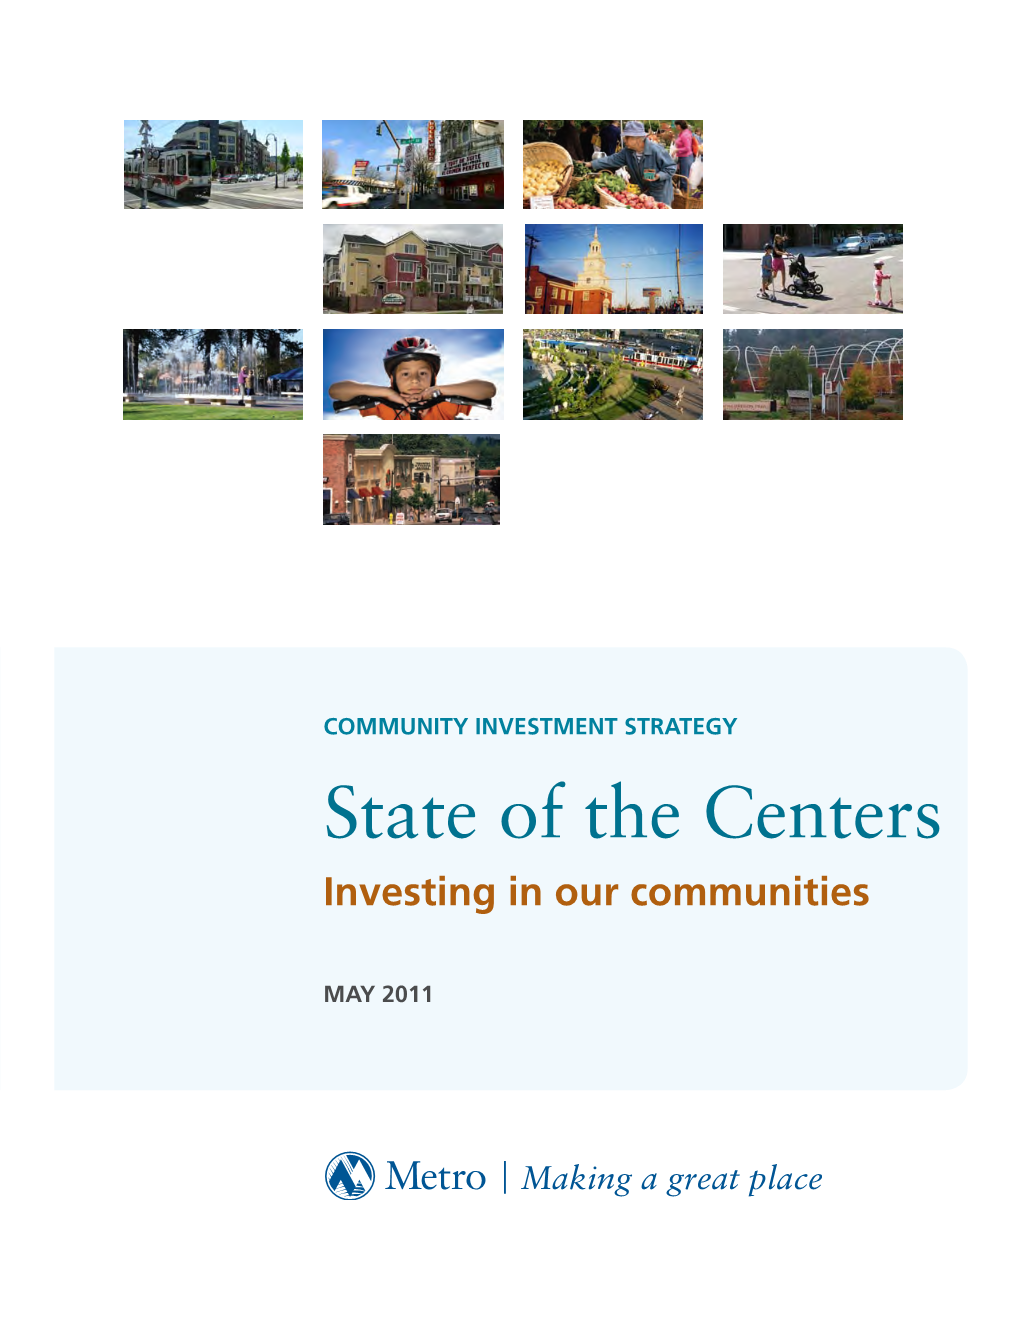 State of the Centers Investing in Our Communities